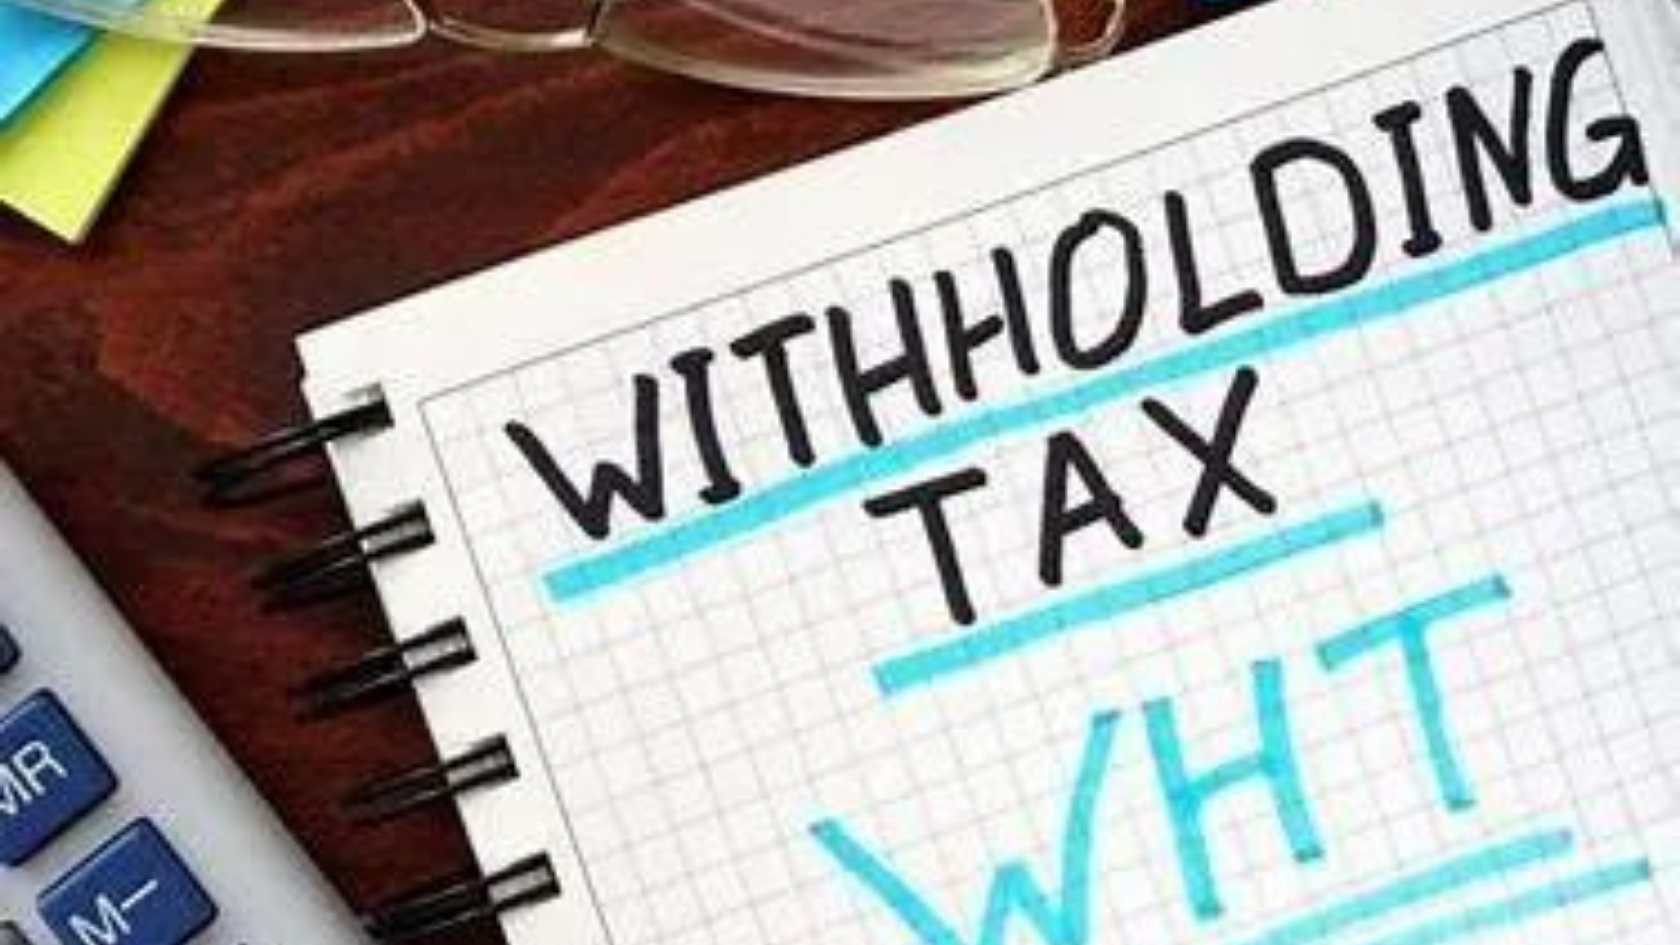 An image showing Withholding Tax